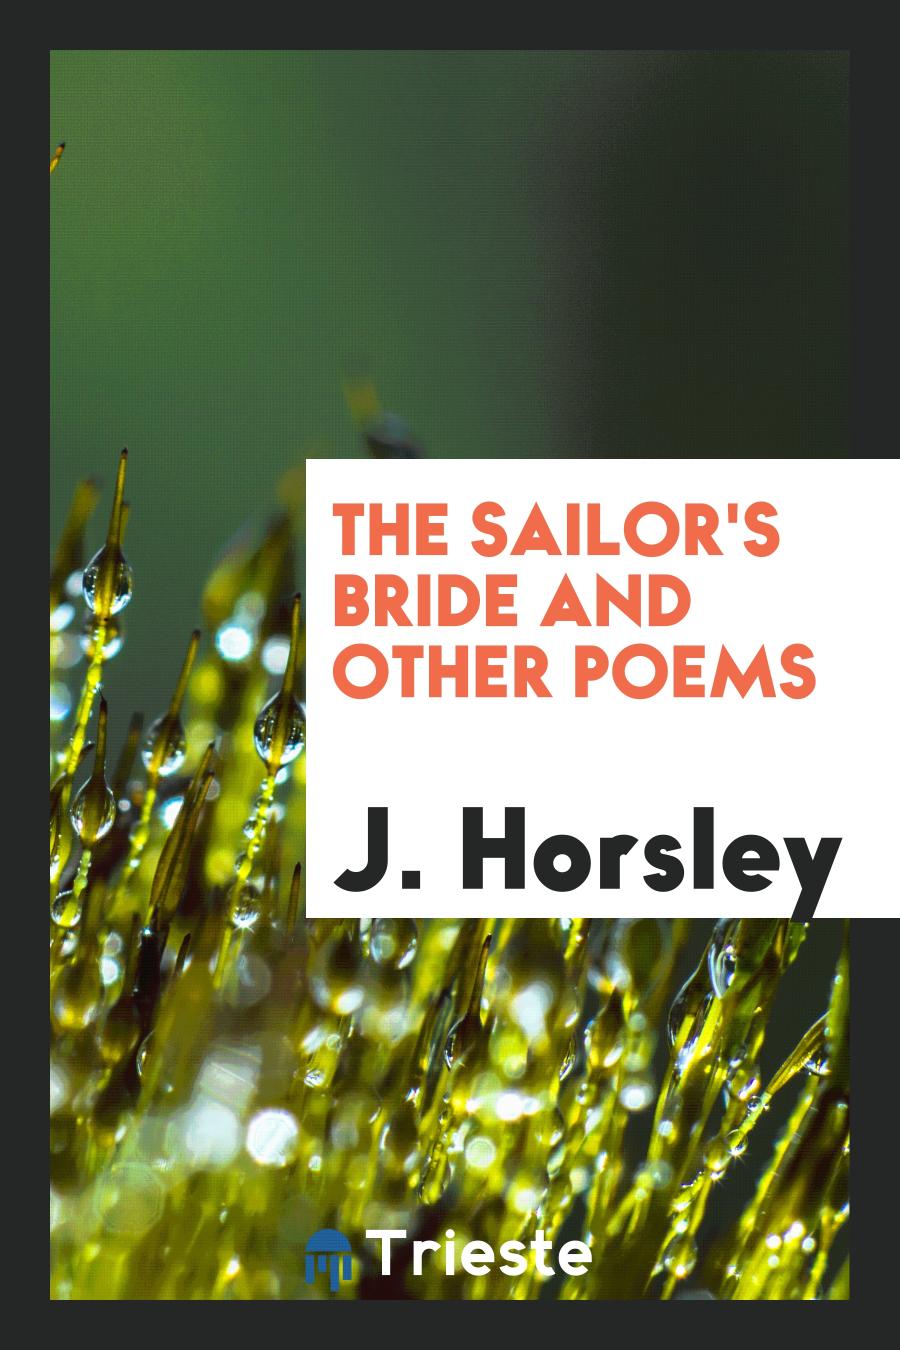 The Sailor's Bride and Other Poems